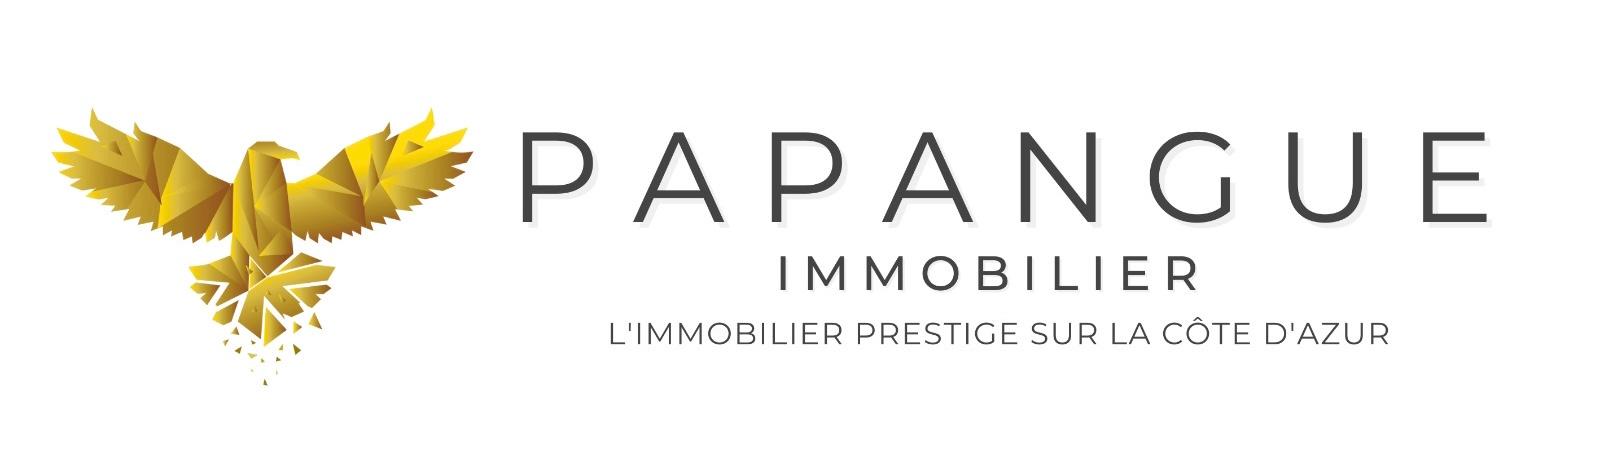 papangue immobilier